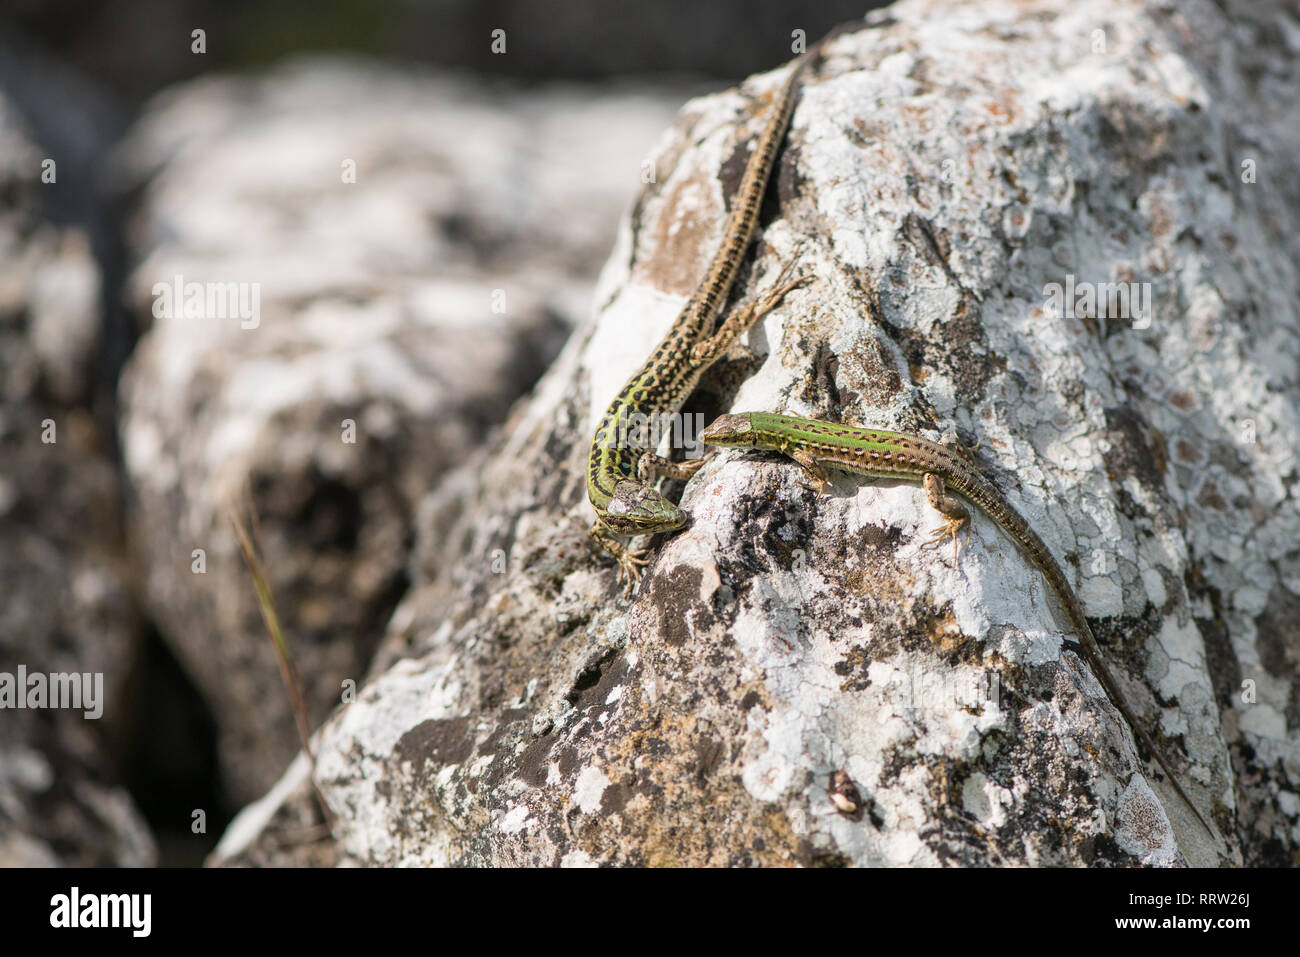 Two Lizards resting on a white rock Stock Photo